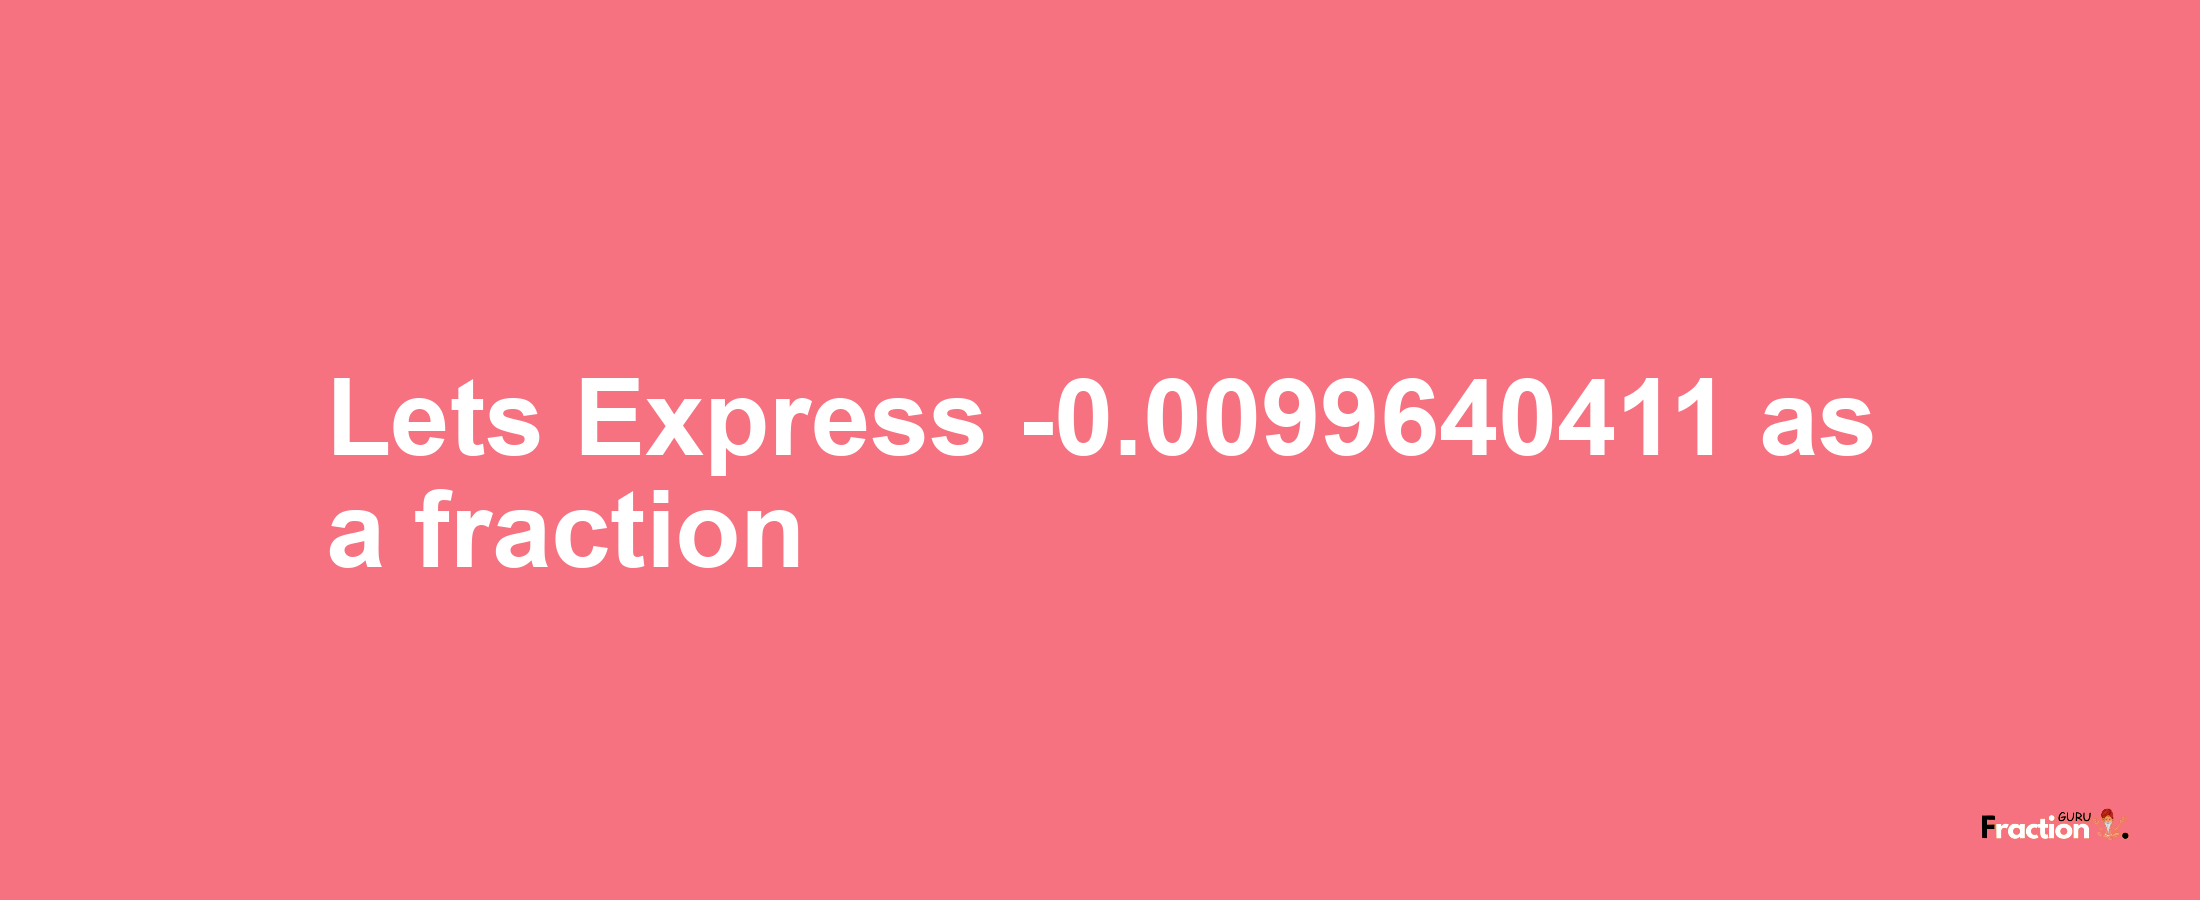 Lets Express -0.0099640411 as afraction